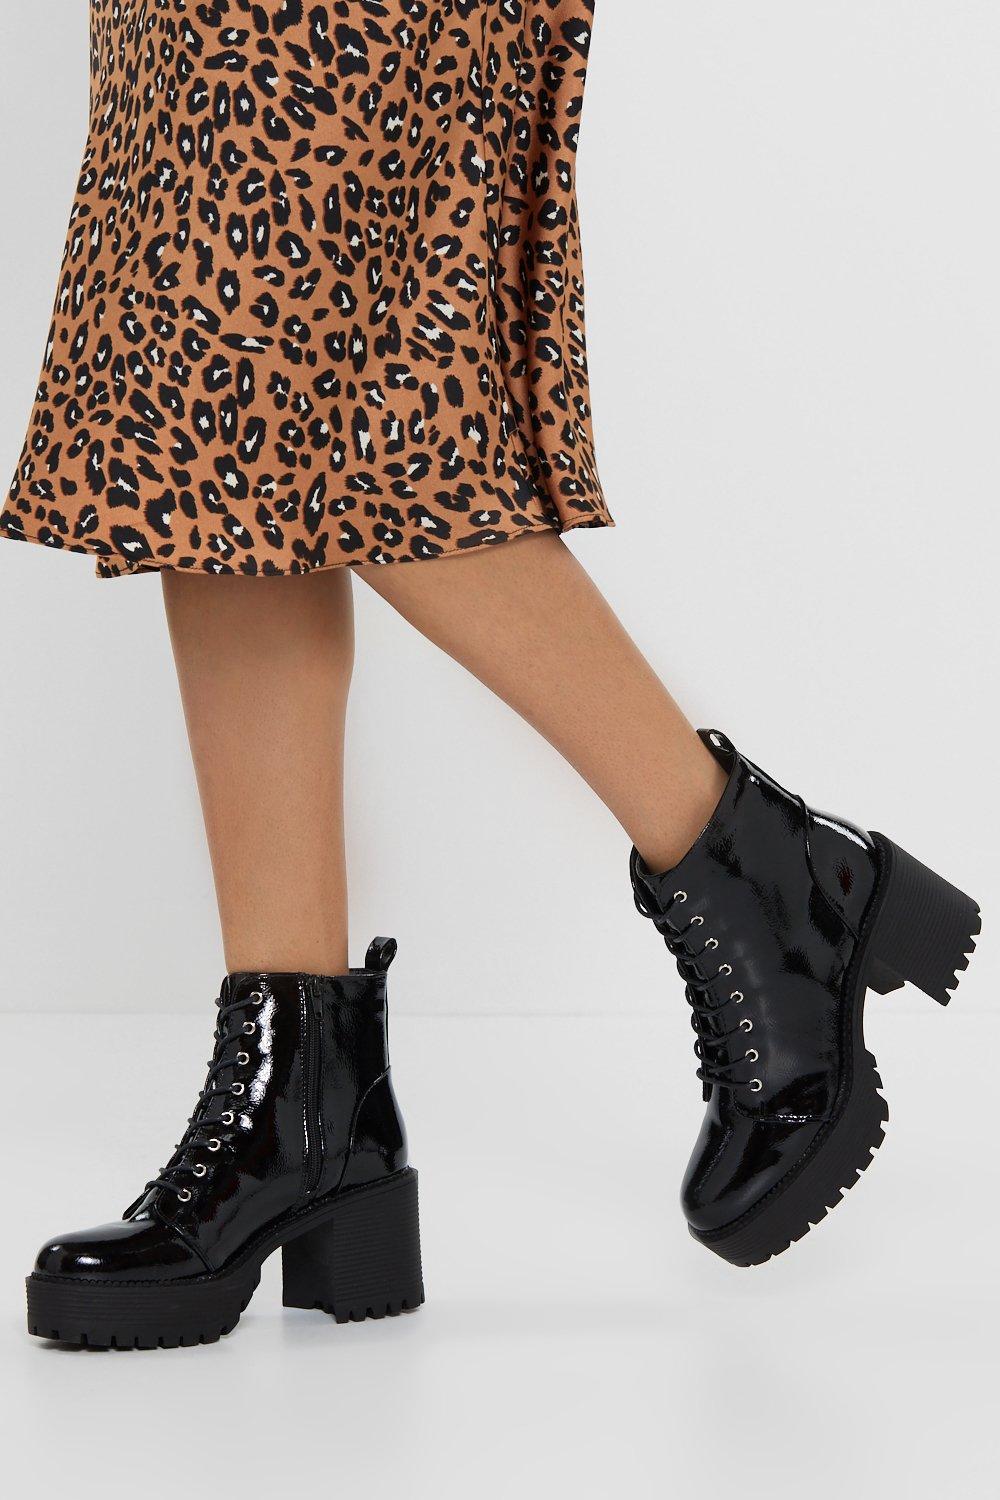 dress with chunky boots